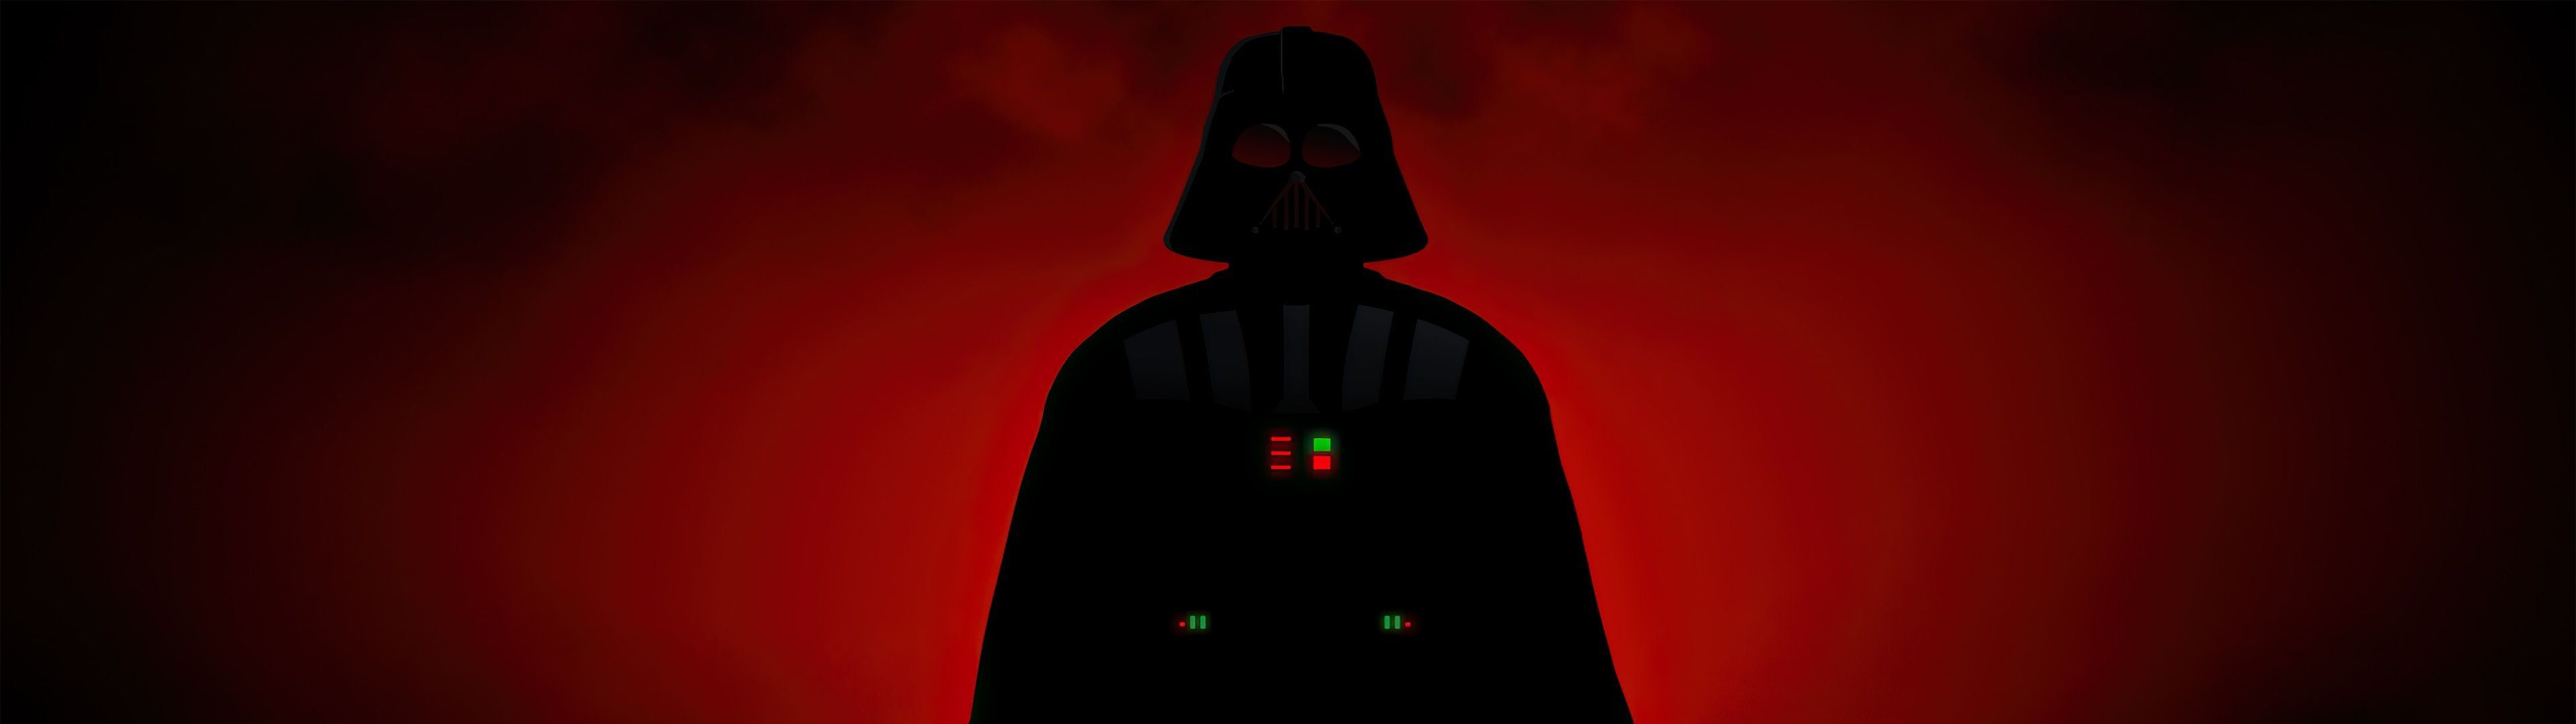 Darth Vader standing in front of a red background - Darth Vader